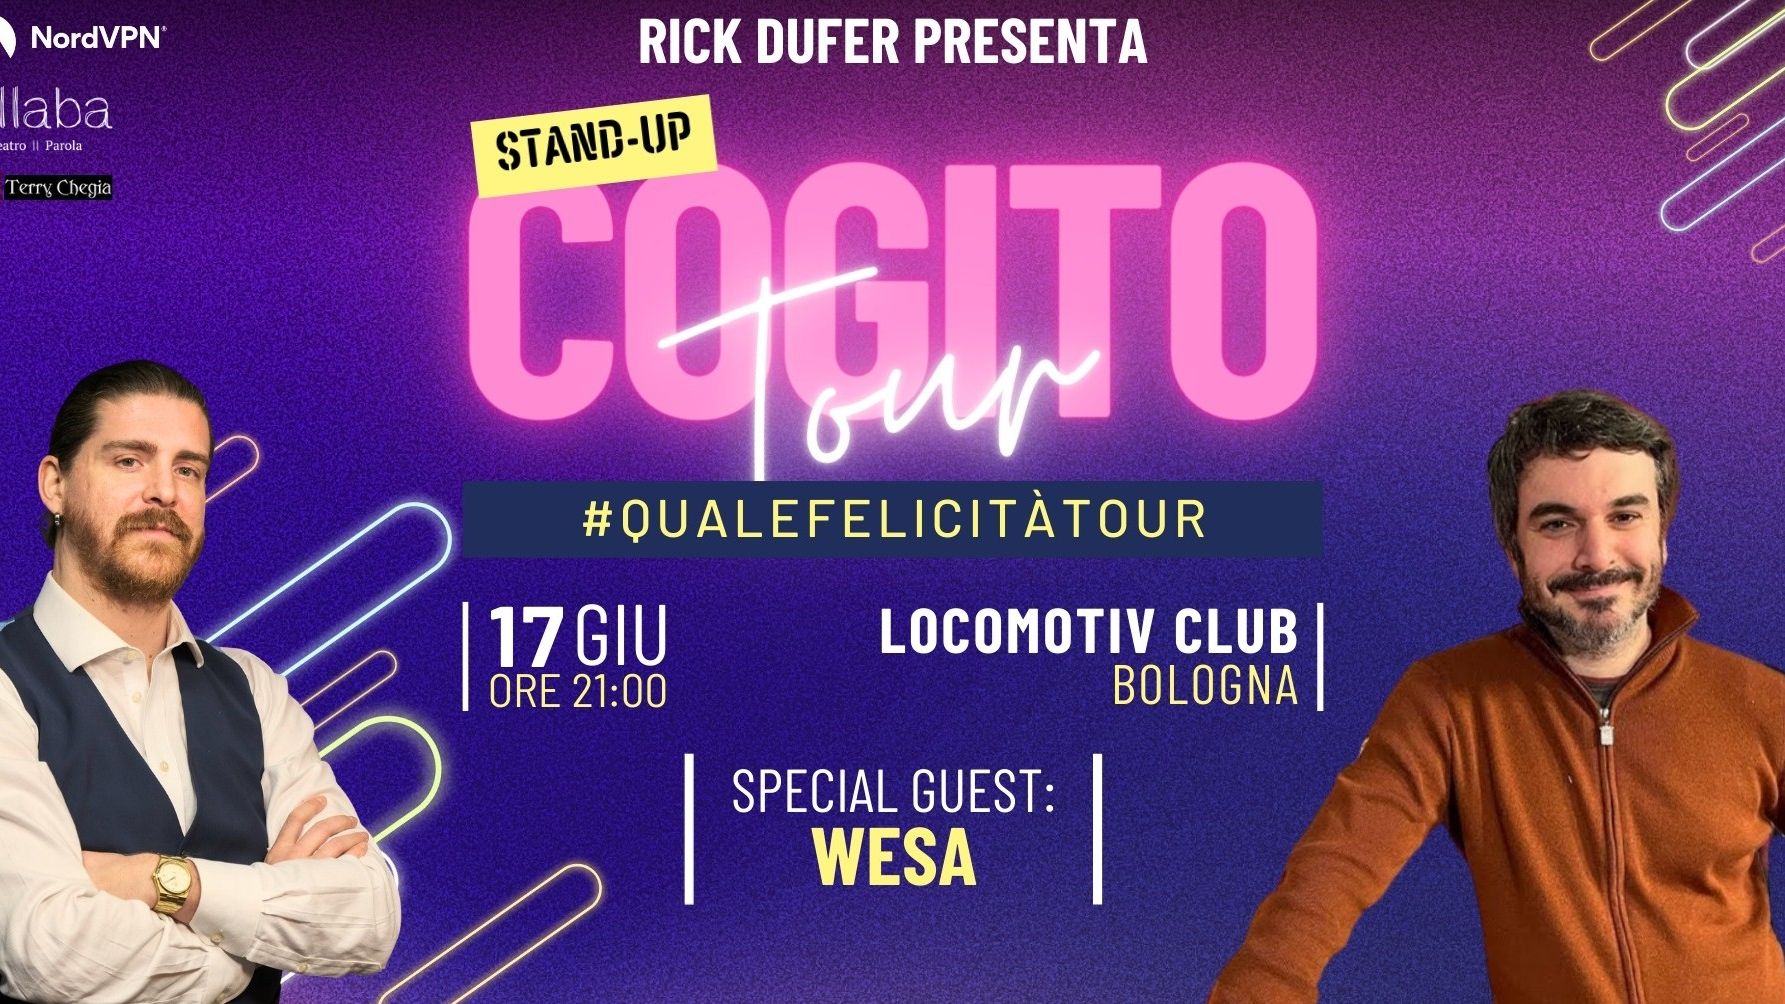 Rick Dufer - Stand Up Cogito Tour